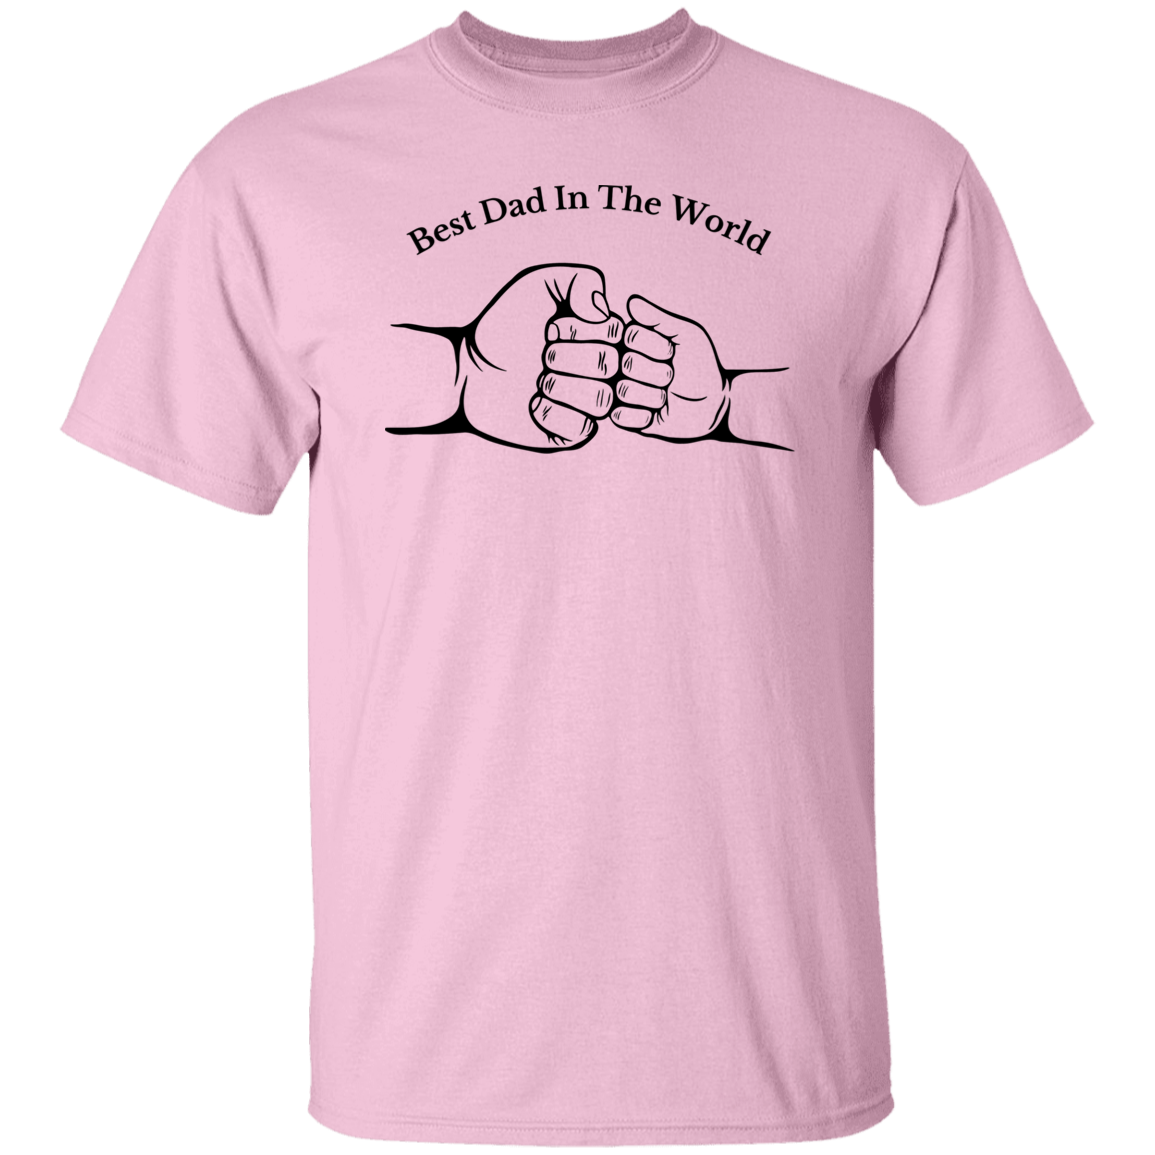 Light Pink T-Shirt - Best Dad In The World Apparel